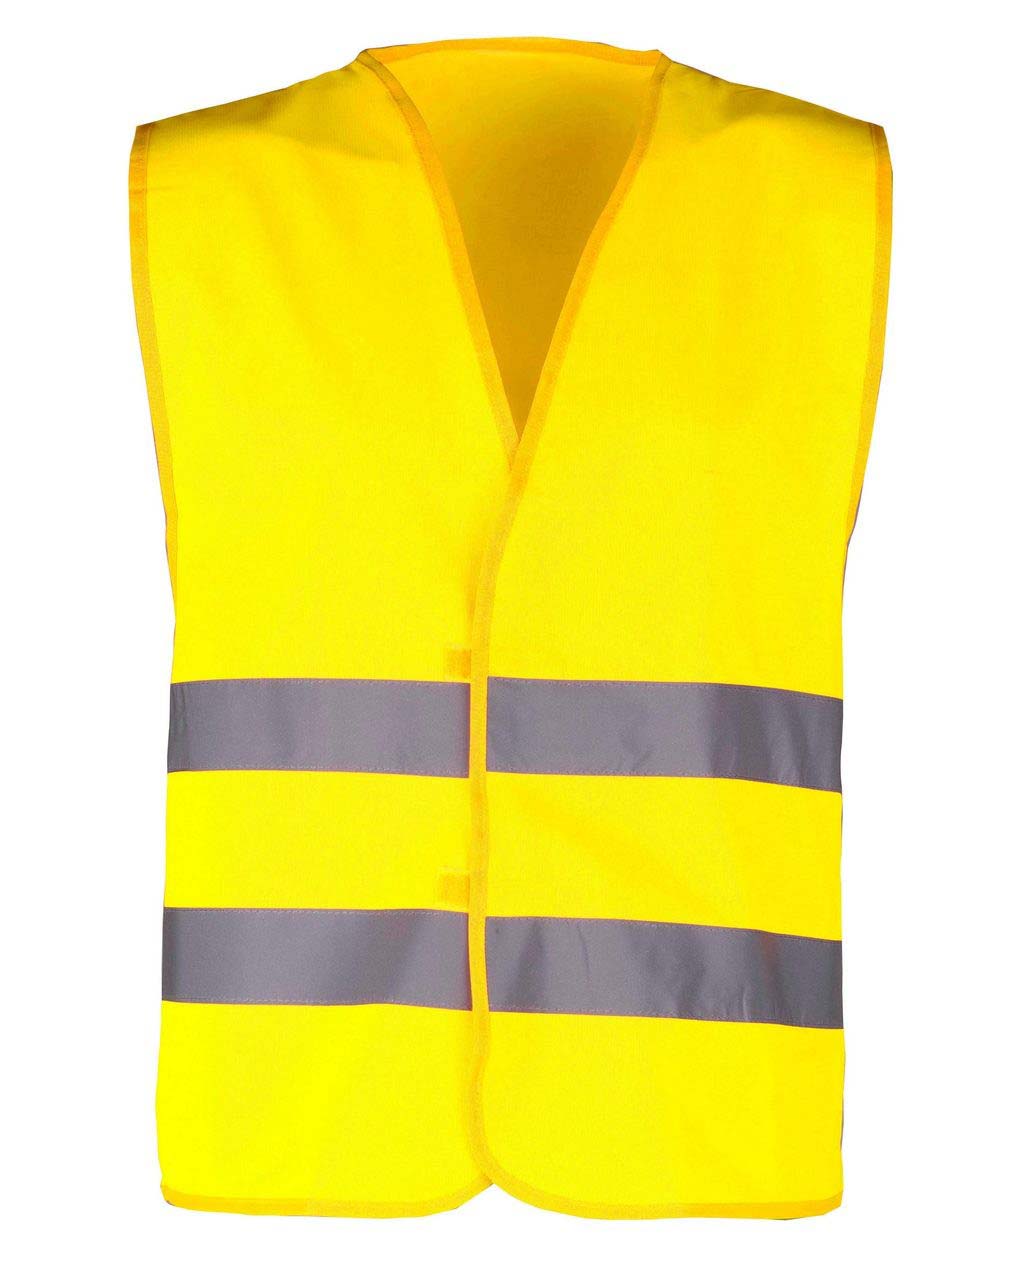 KAPRIOL HIGH VISIBILITY VEST YELLOW - ONE SIZE